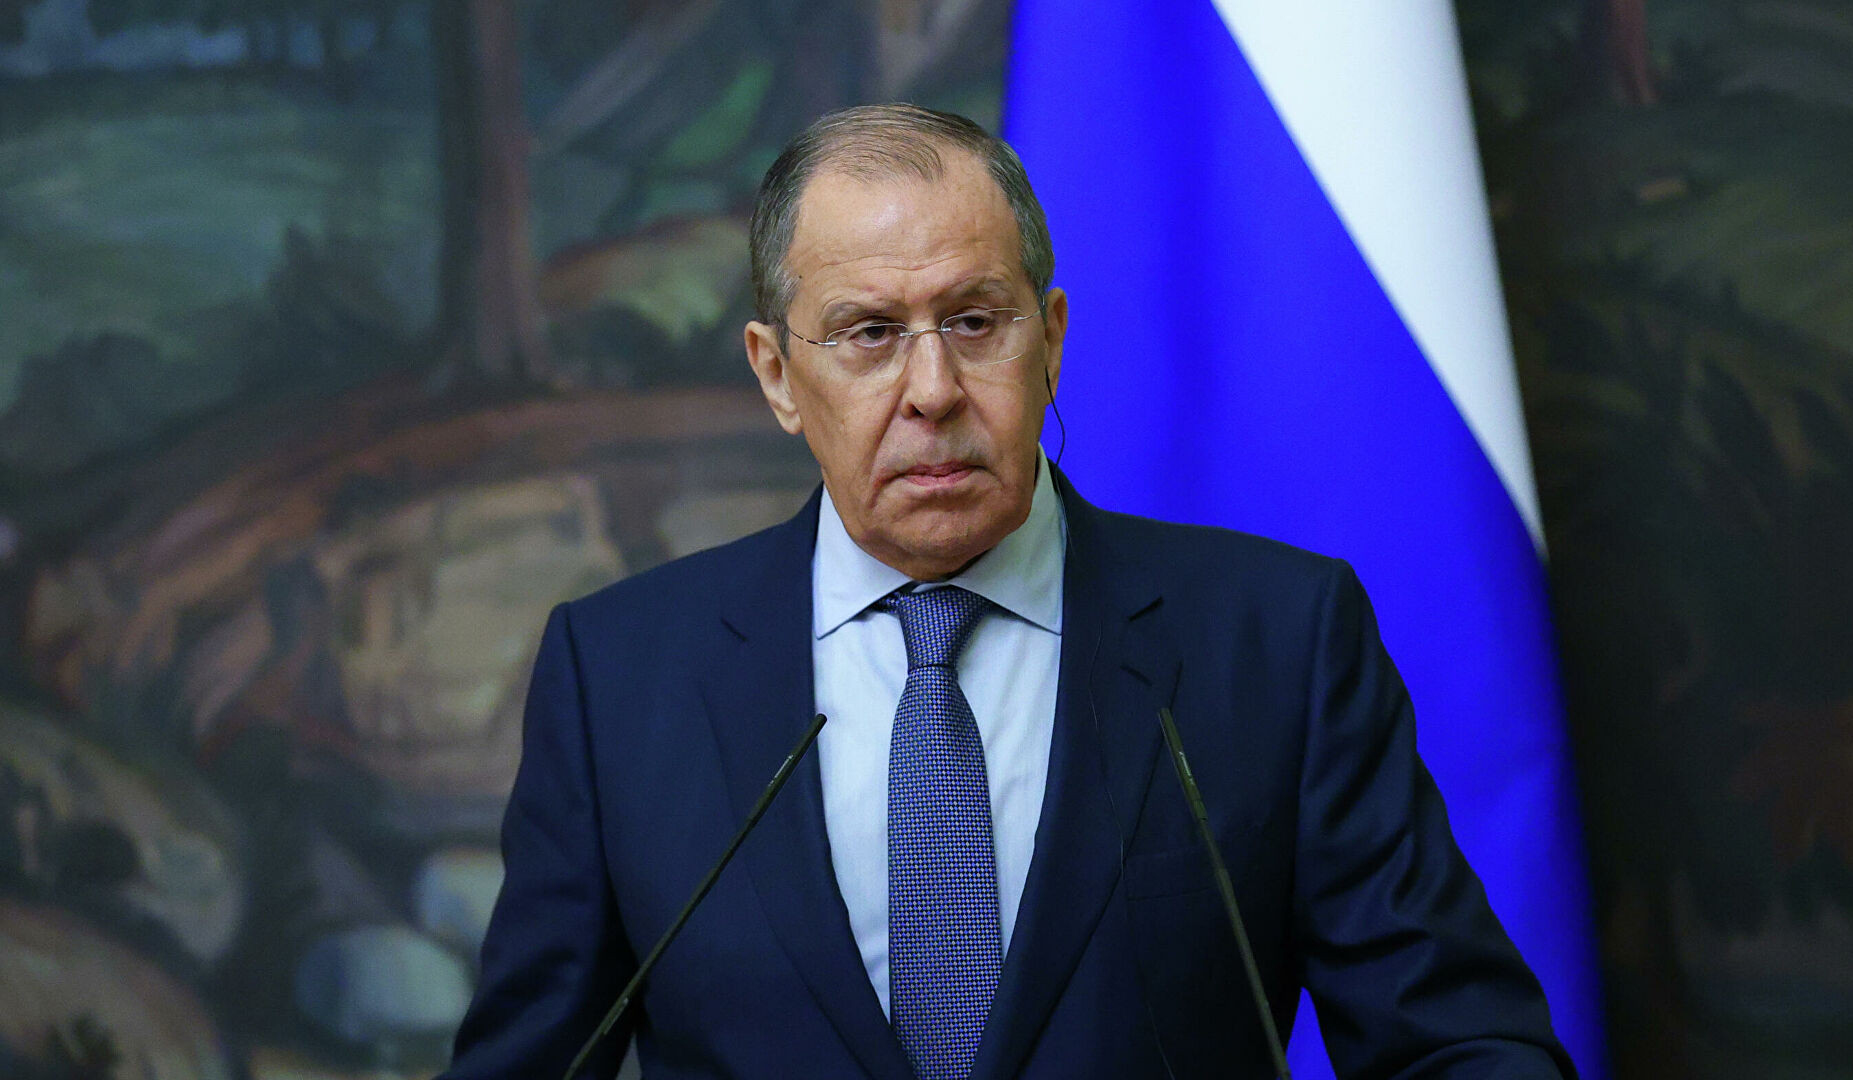 New Kyiv-drafted agreement marks departure from provisions recorded in Istanbul: Lavrov